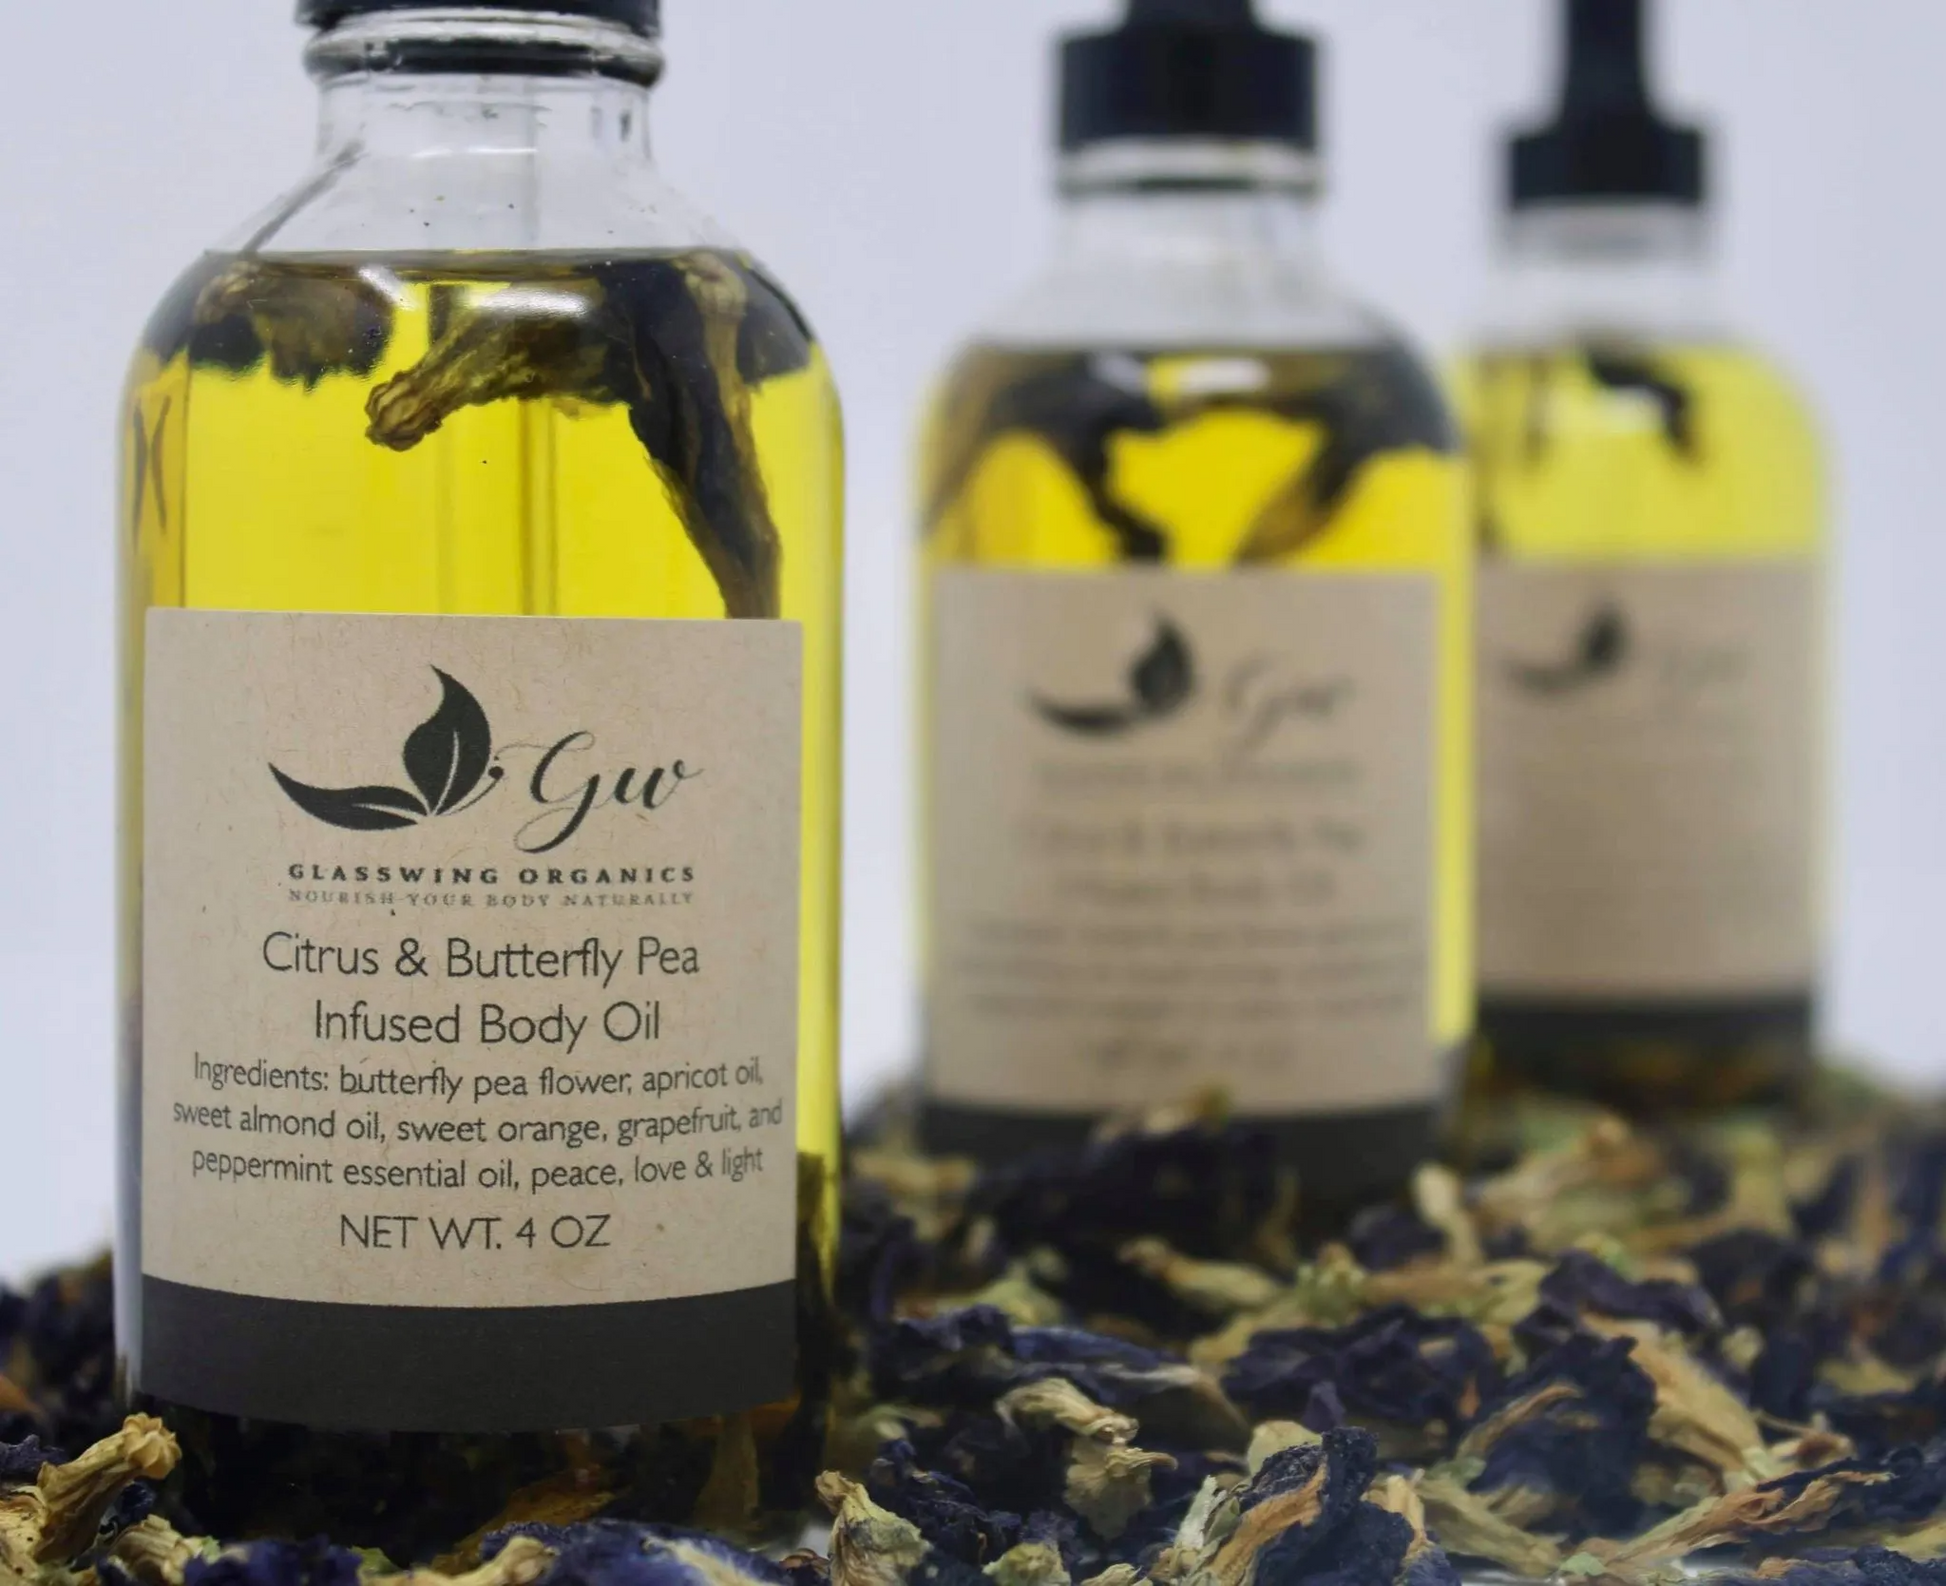 CITRUS & BUTTERFLY PEA INFUSED BODY OIL – GlassWing Organics